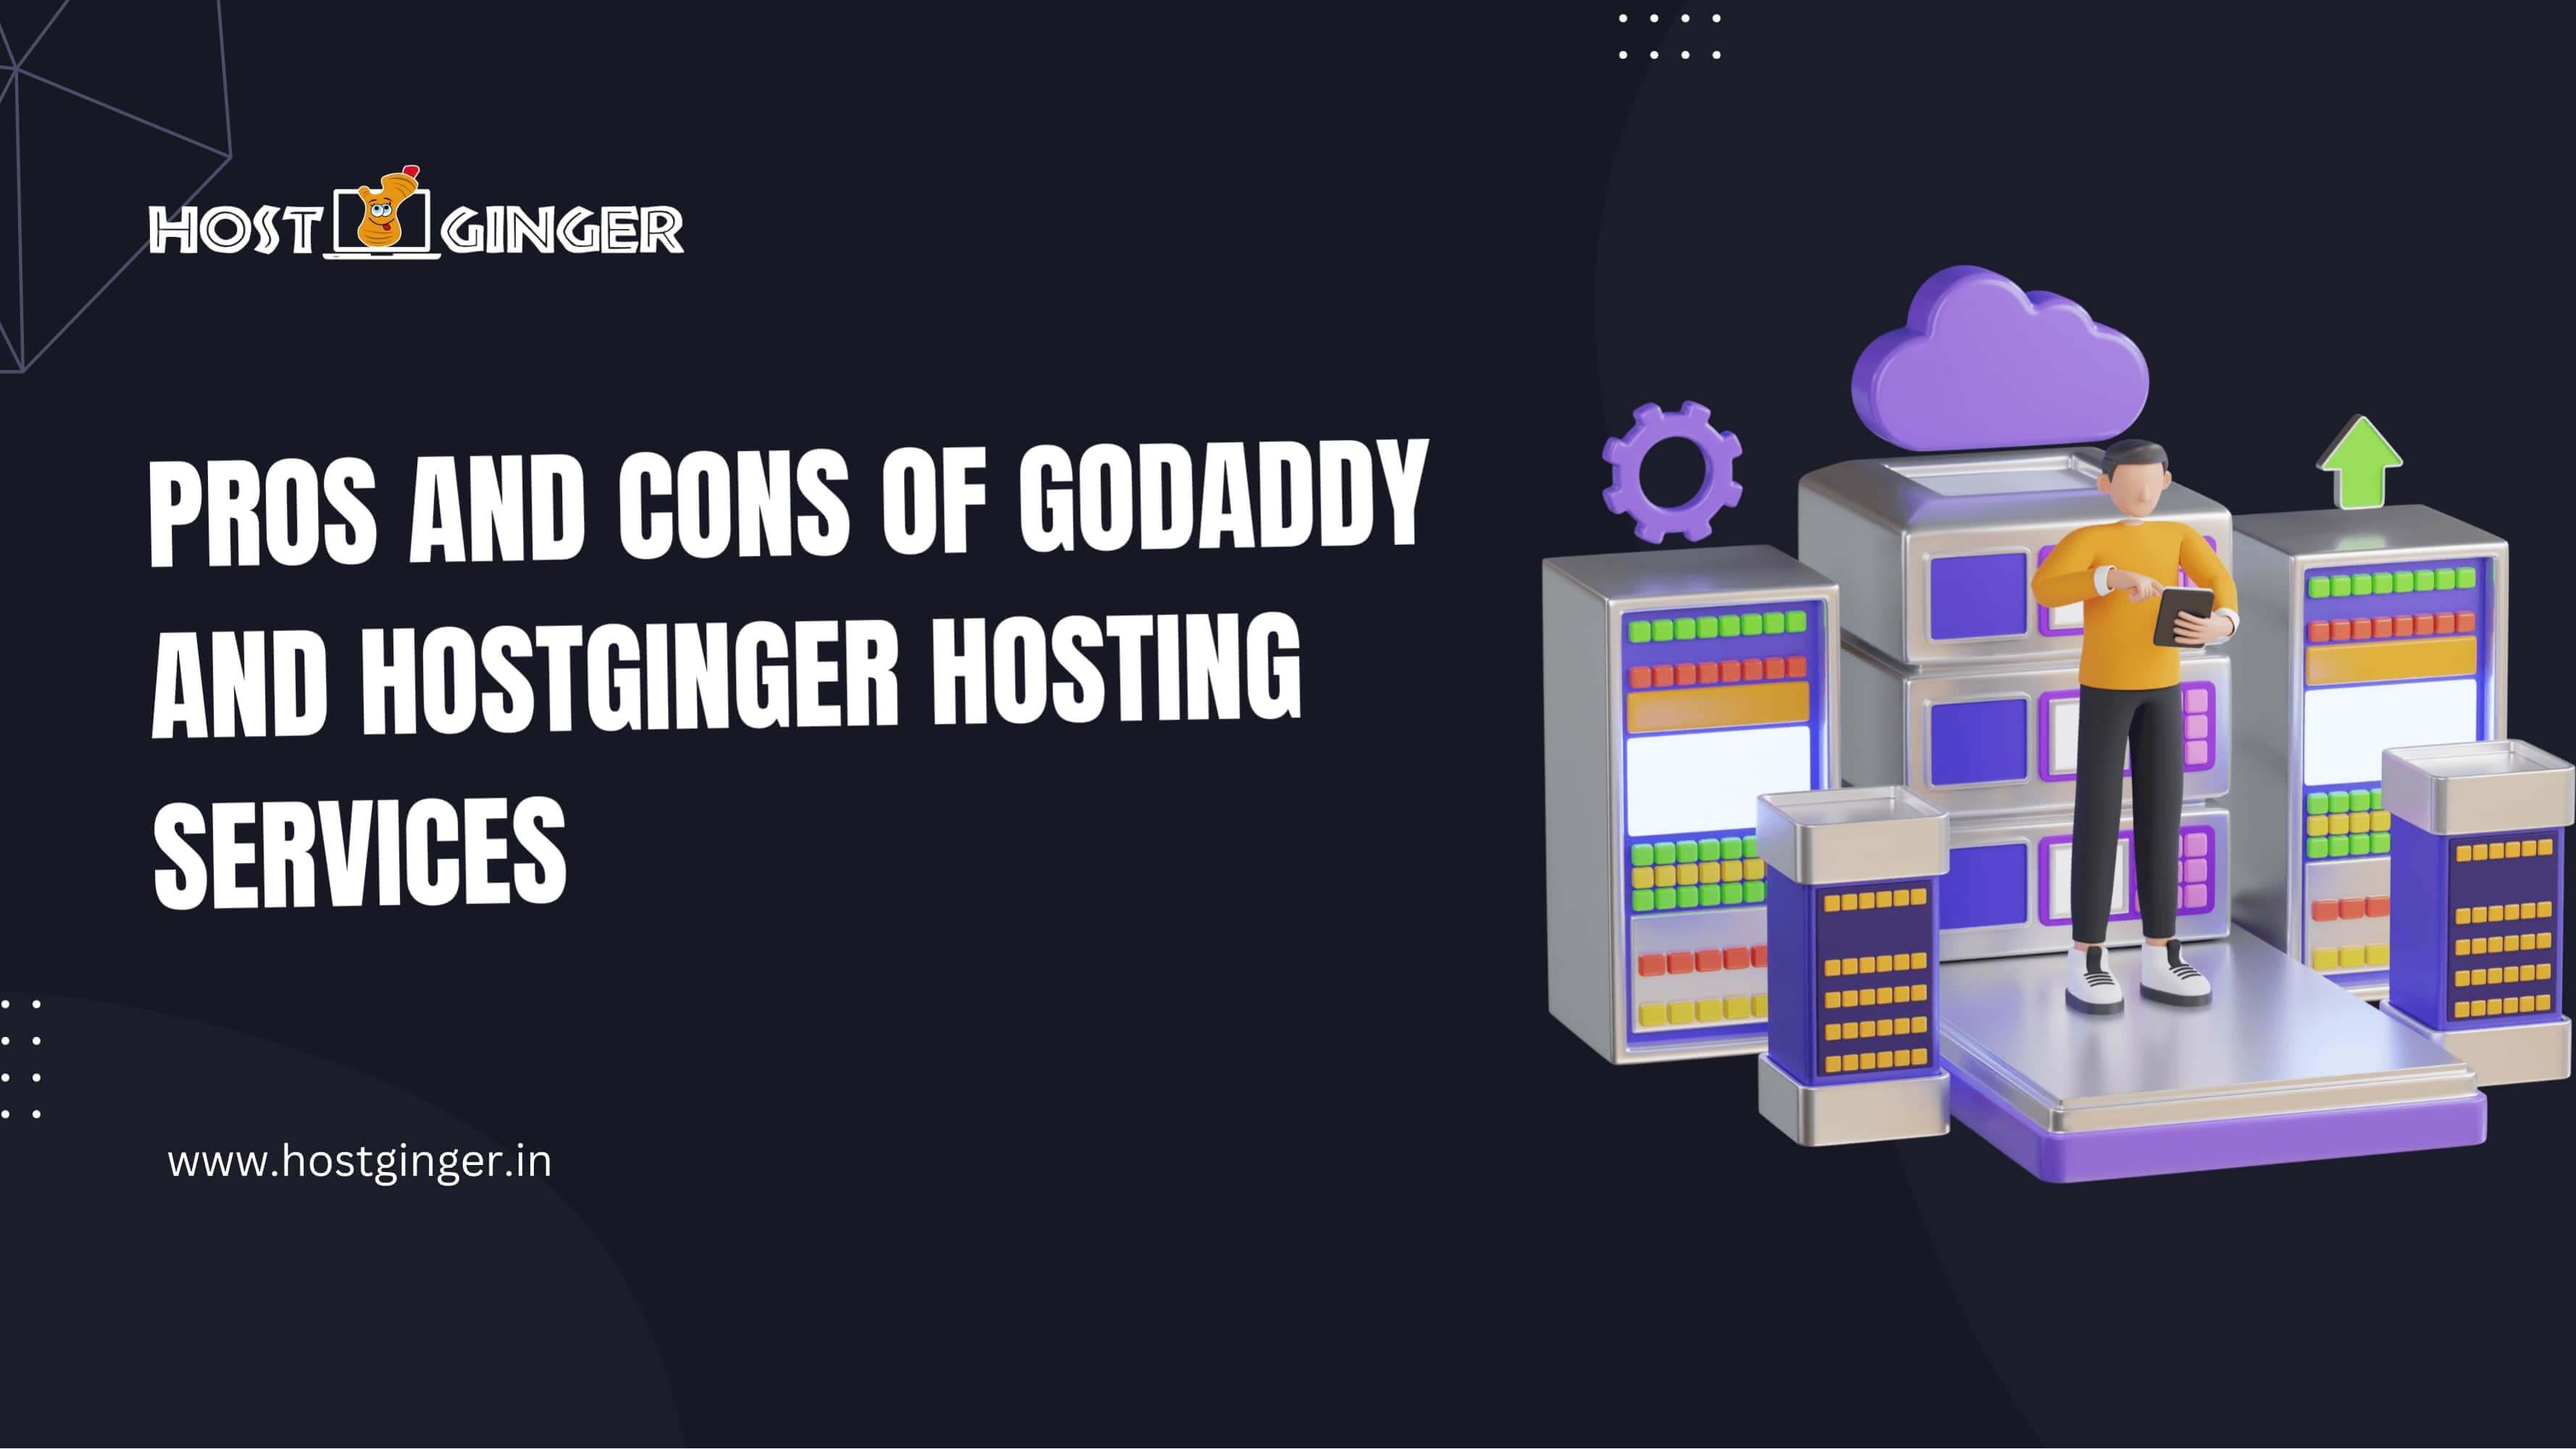 Pros and Cons of GoDaddy and Hostginger Hosting Services